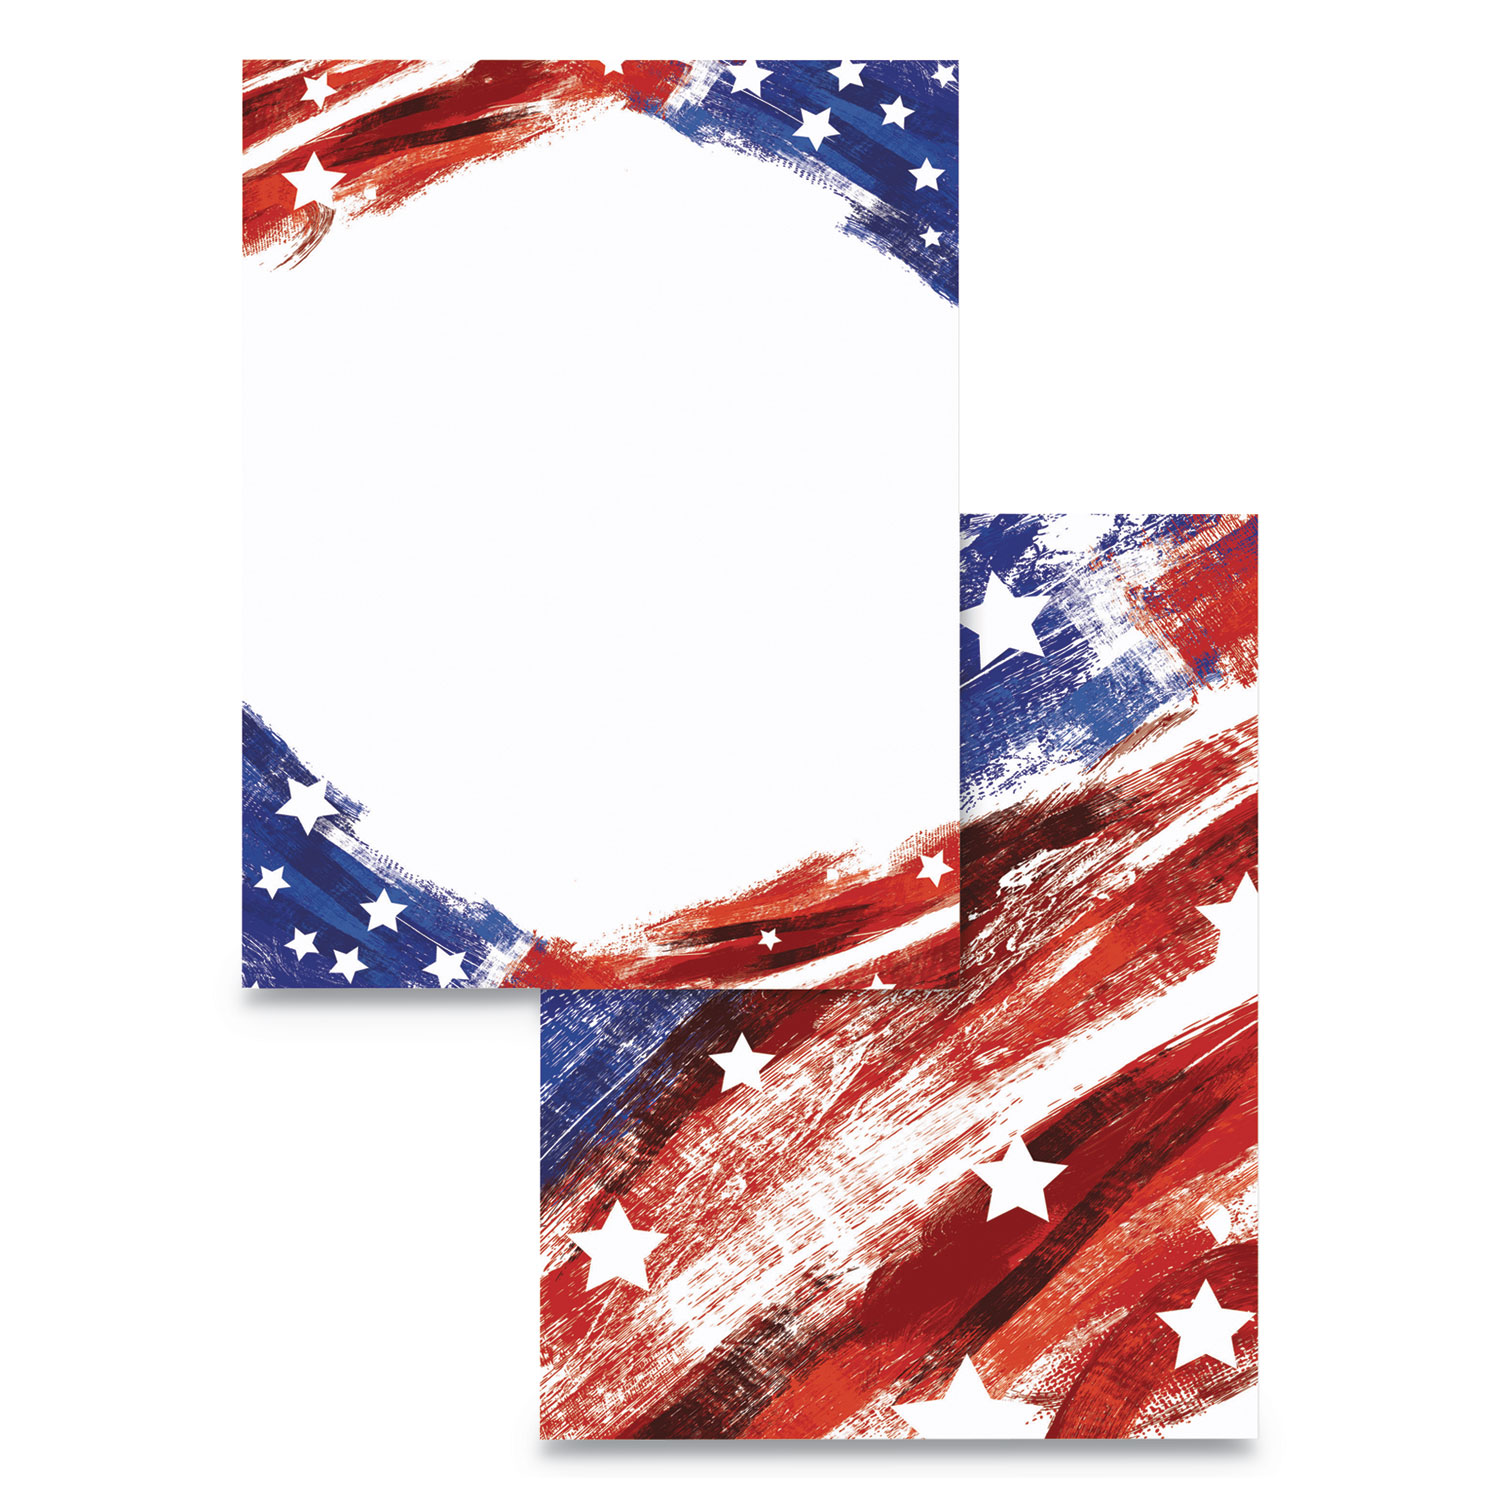  Astrodesigns 91254 Pre-Printed Paper, 28lb, 8.5 x 11, Red/White/Blue, 100/Pack (WAU91254) 